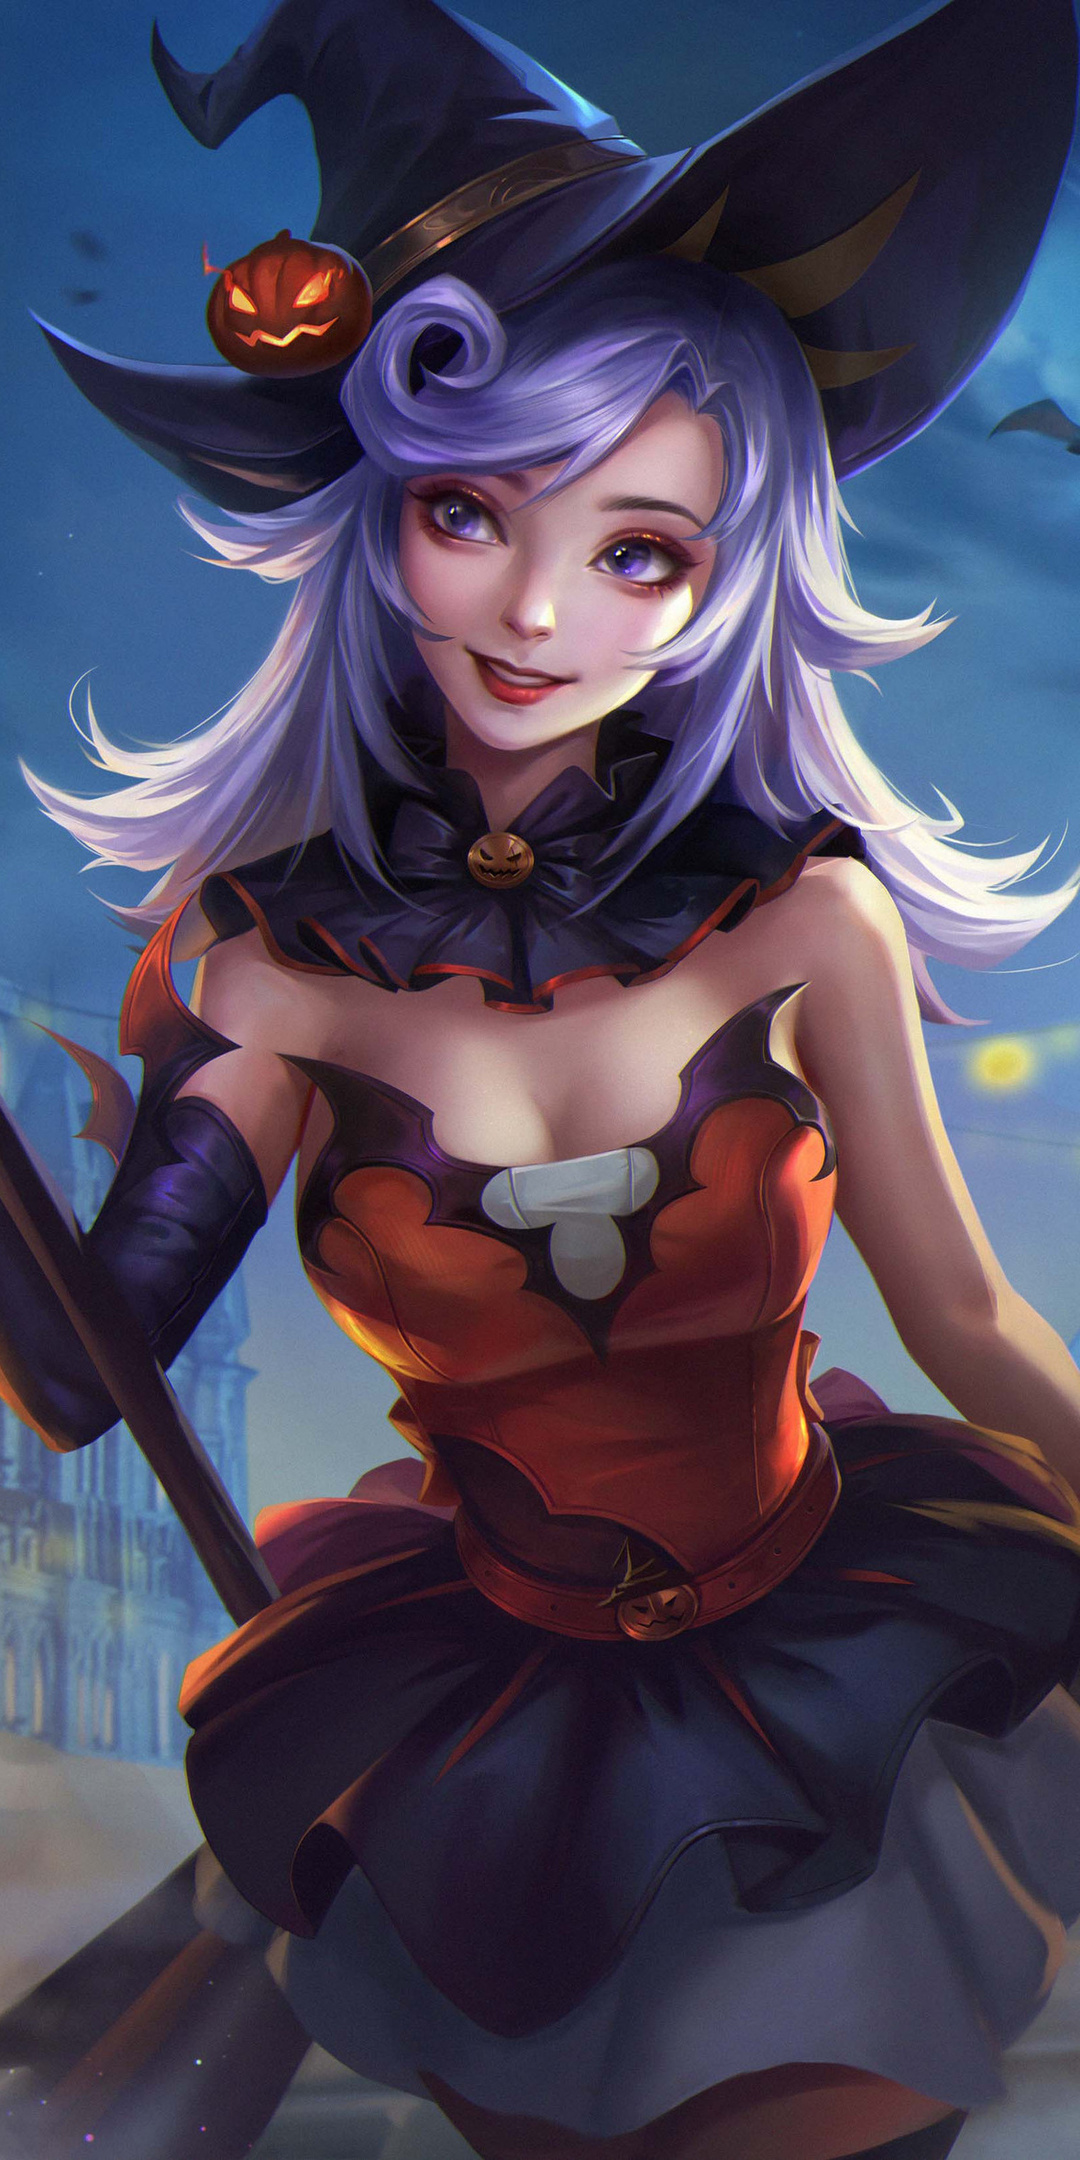 Happy Halloween Witch 2020 Wallpaper In 1080x2160 Resolution